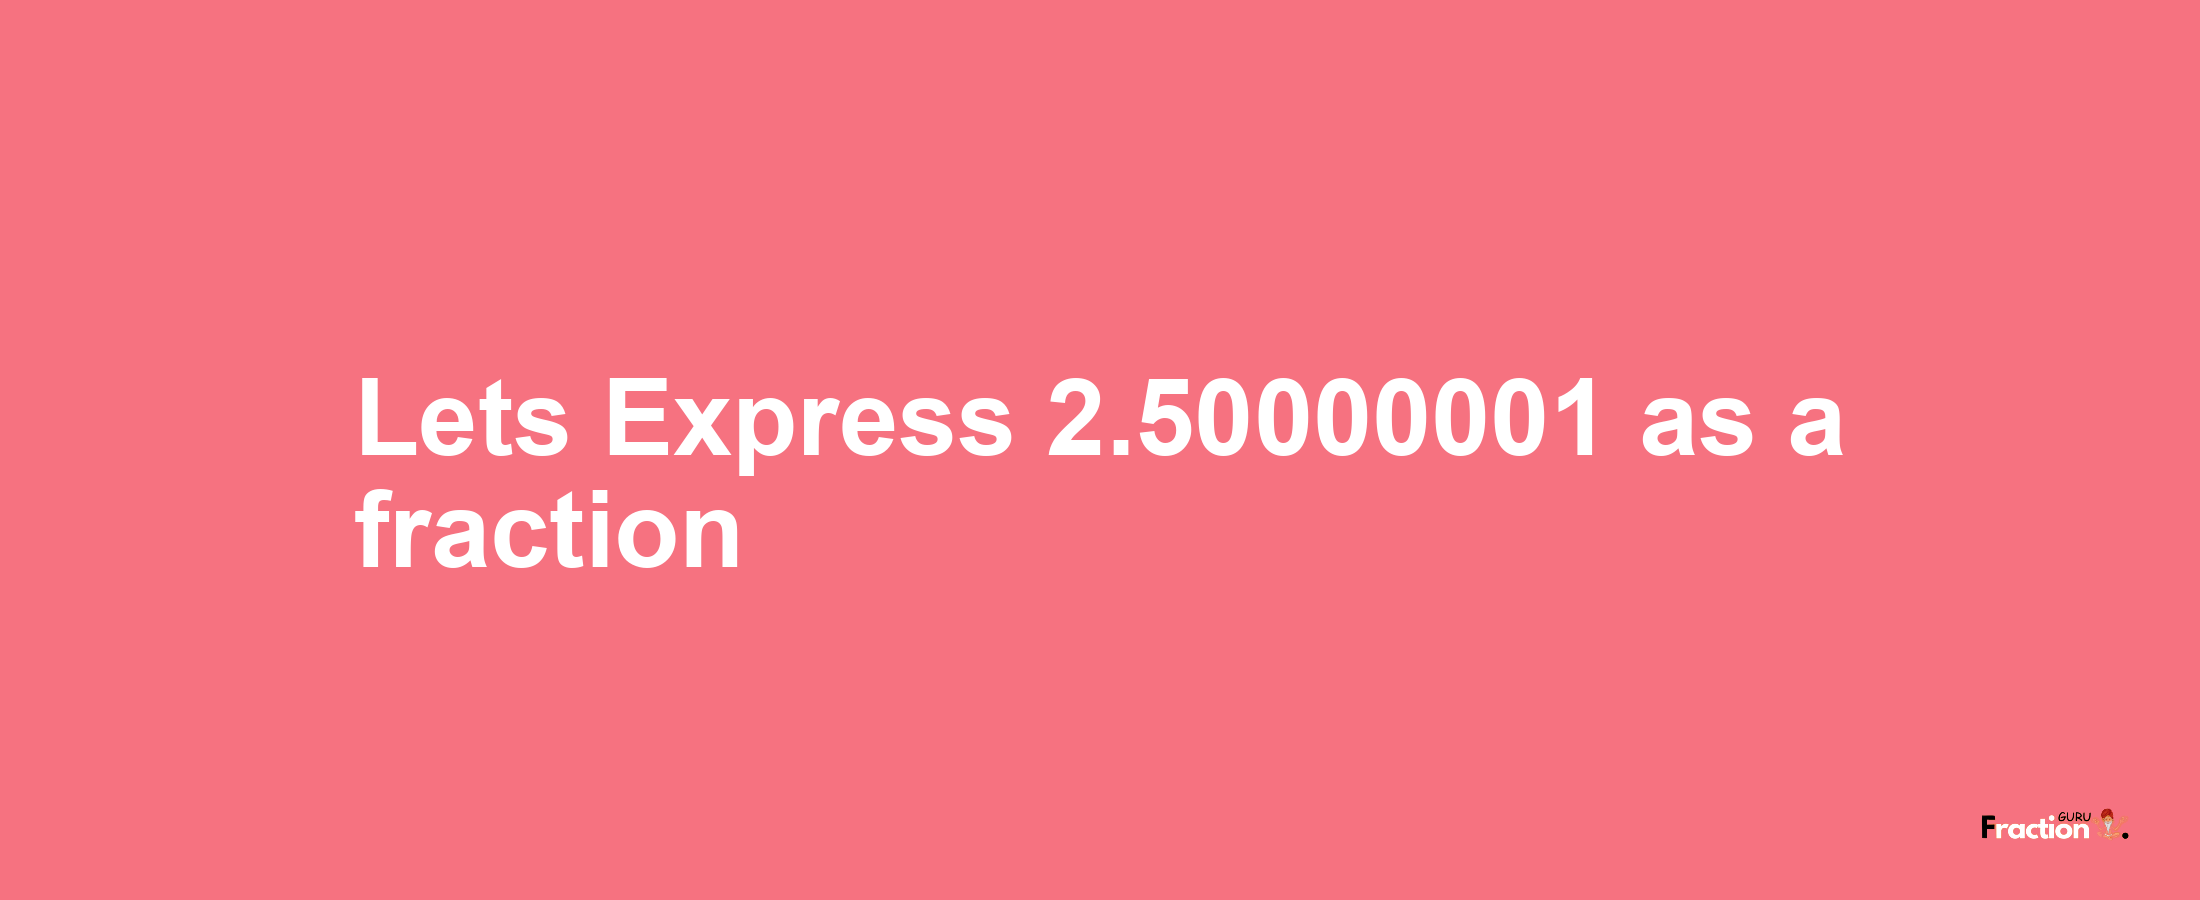 Lets Express 2.50000001 as afraction